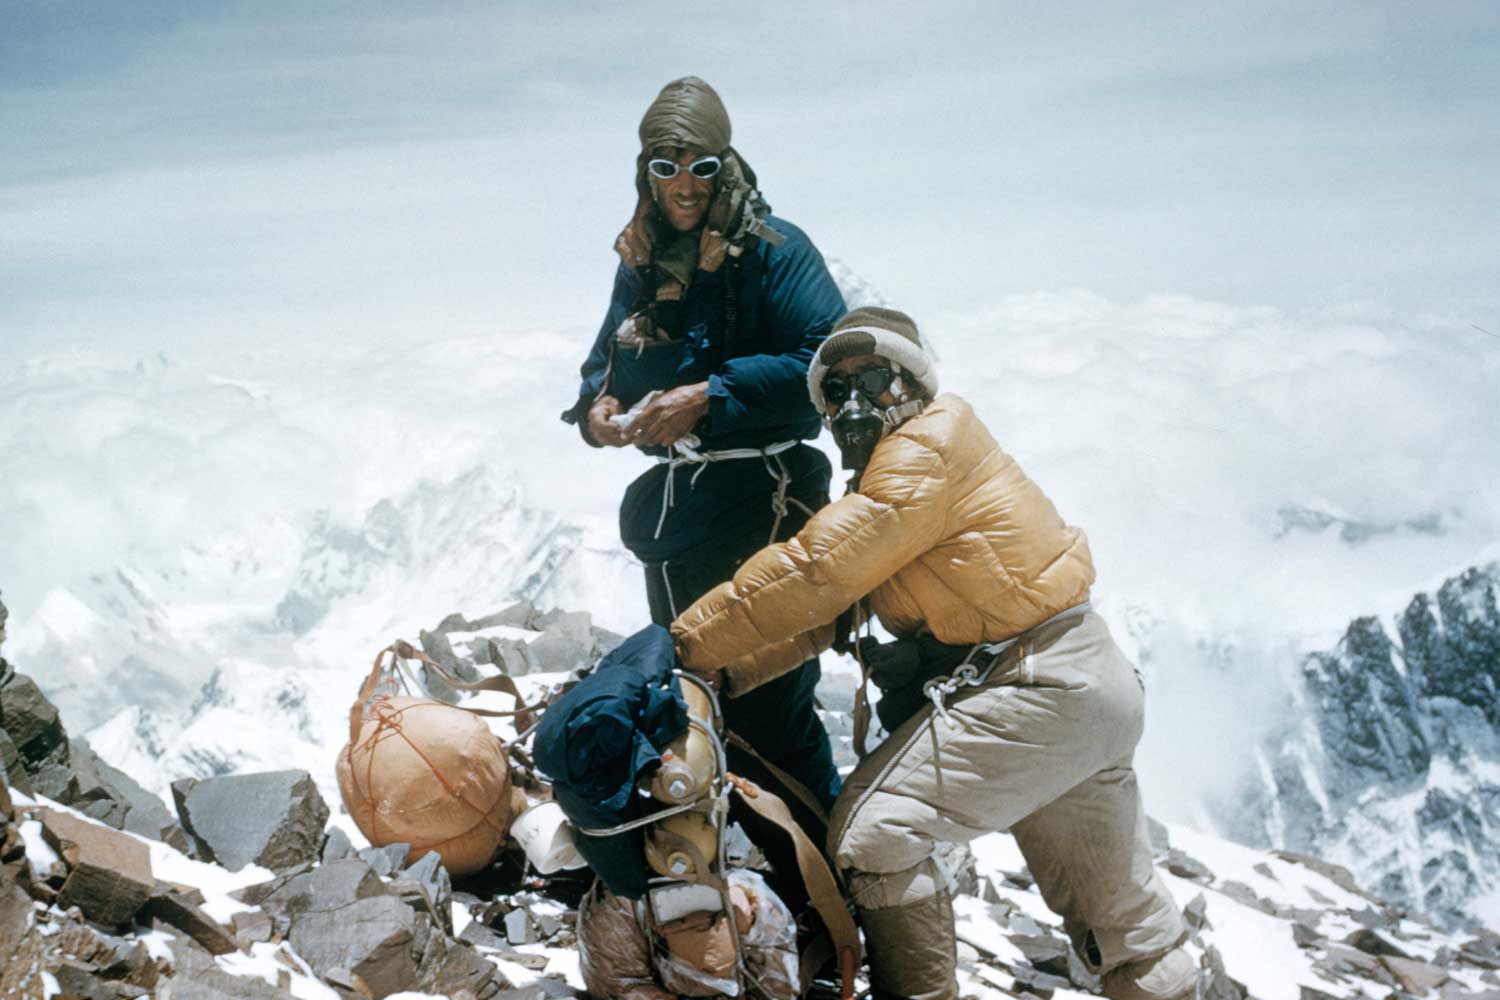 New Zealander Sir Edmund Hillary and Tenzing Norgay, a Nepali Sherpa climber, were the first successful pair from John Hunt's British expedition, and the first in the world to have reached the summit of Mt. Everest. These climbers were given the Rolex reference 6098 big bubbleback watches.